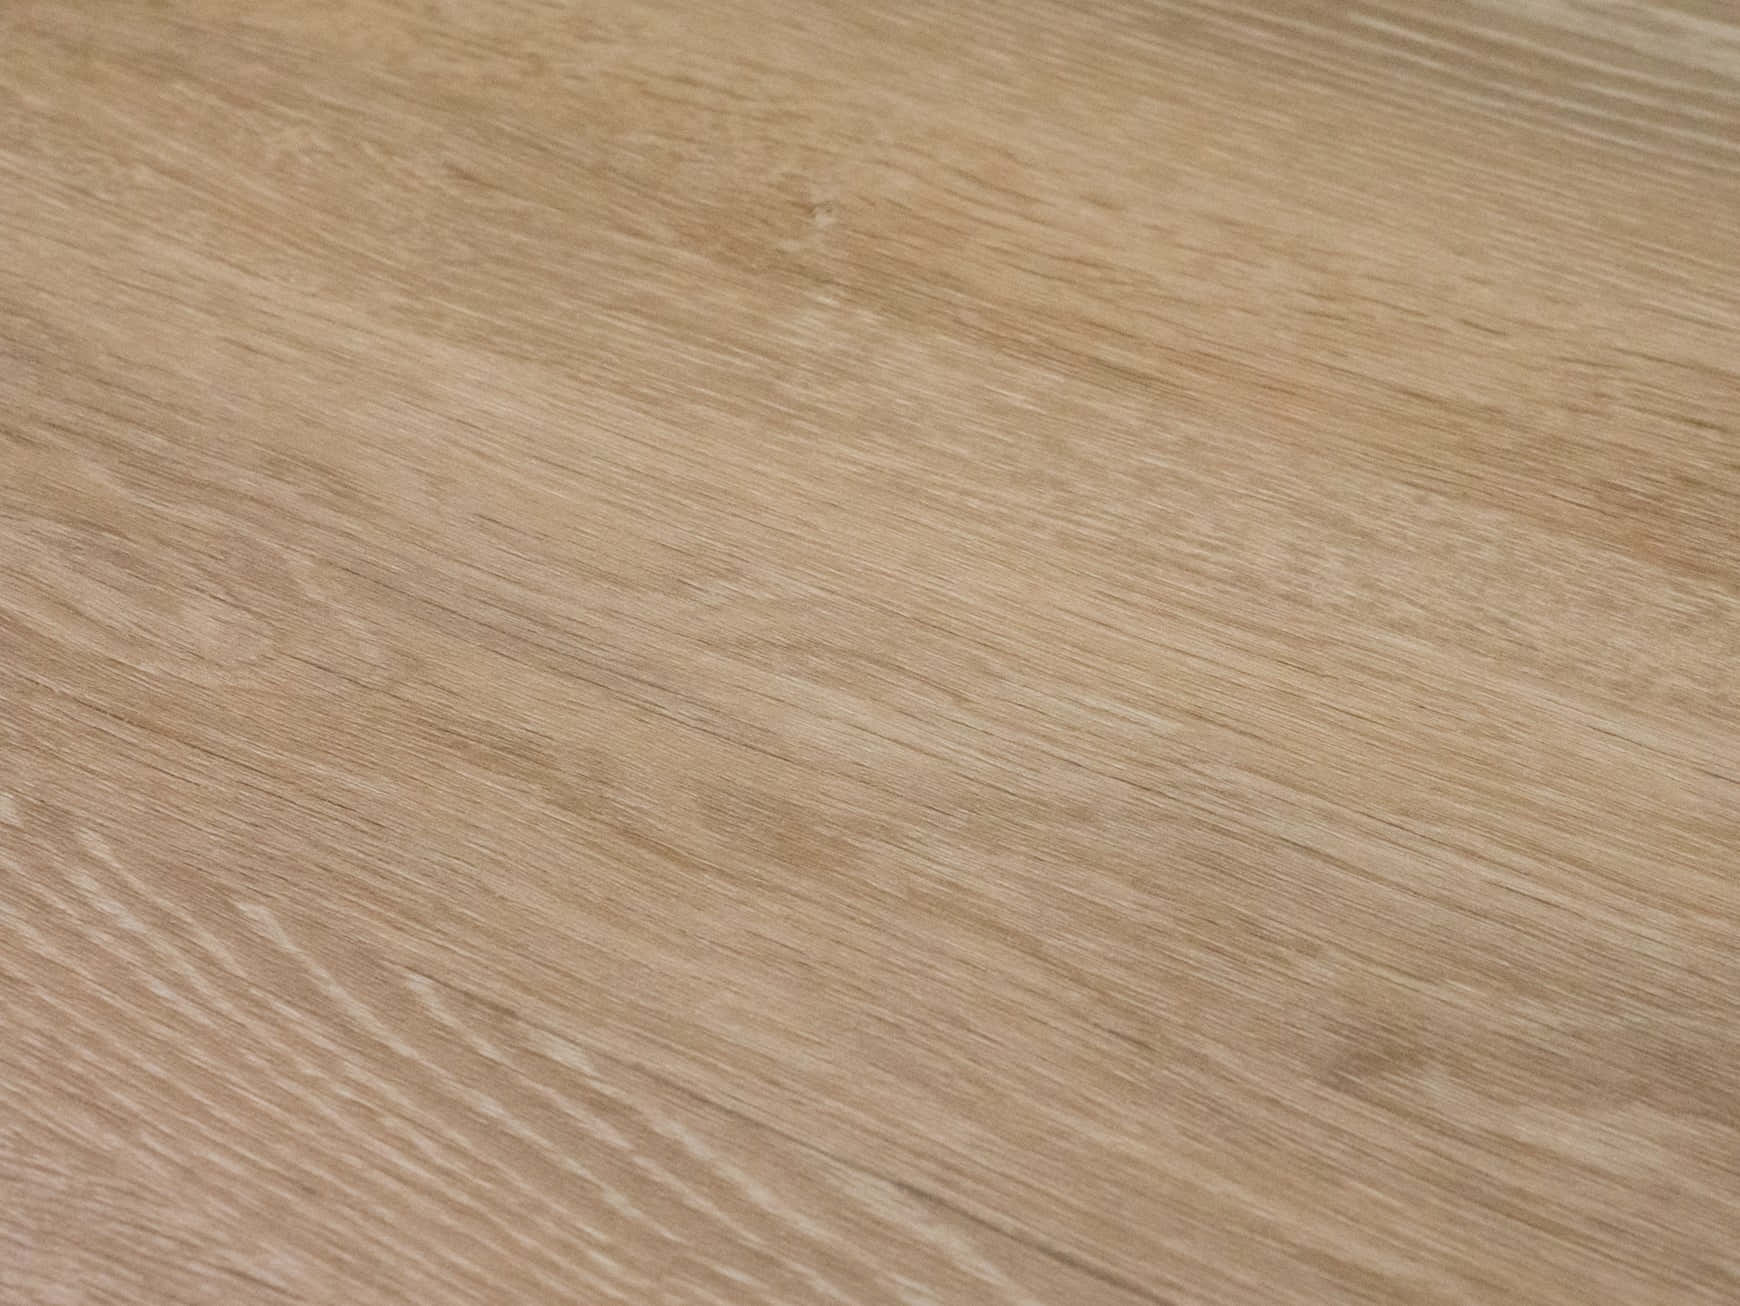 A Close Up View Of A Wooden Floor